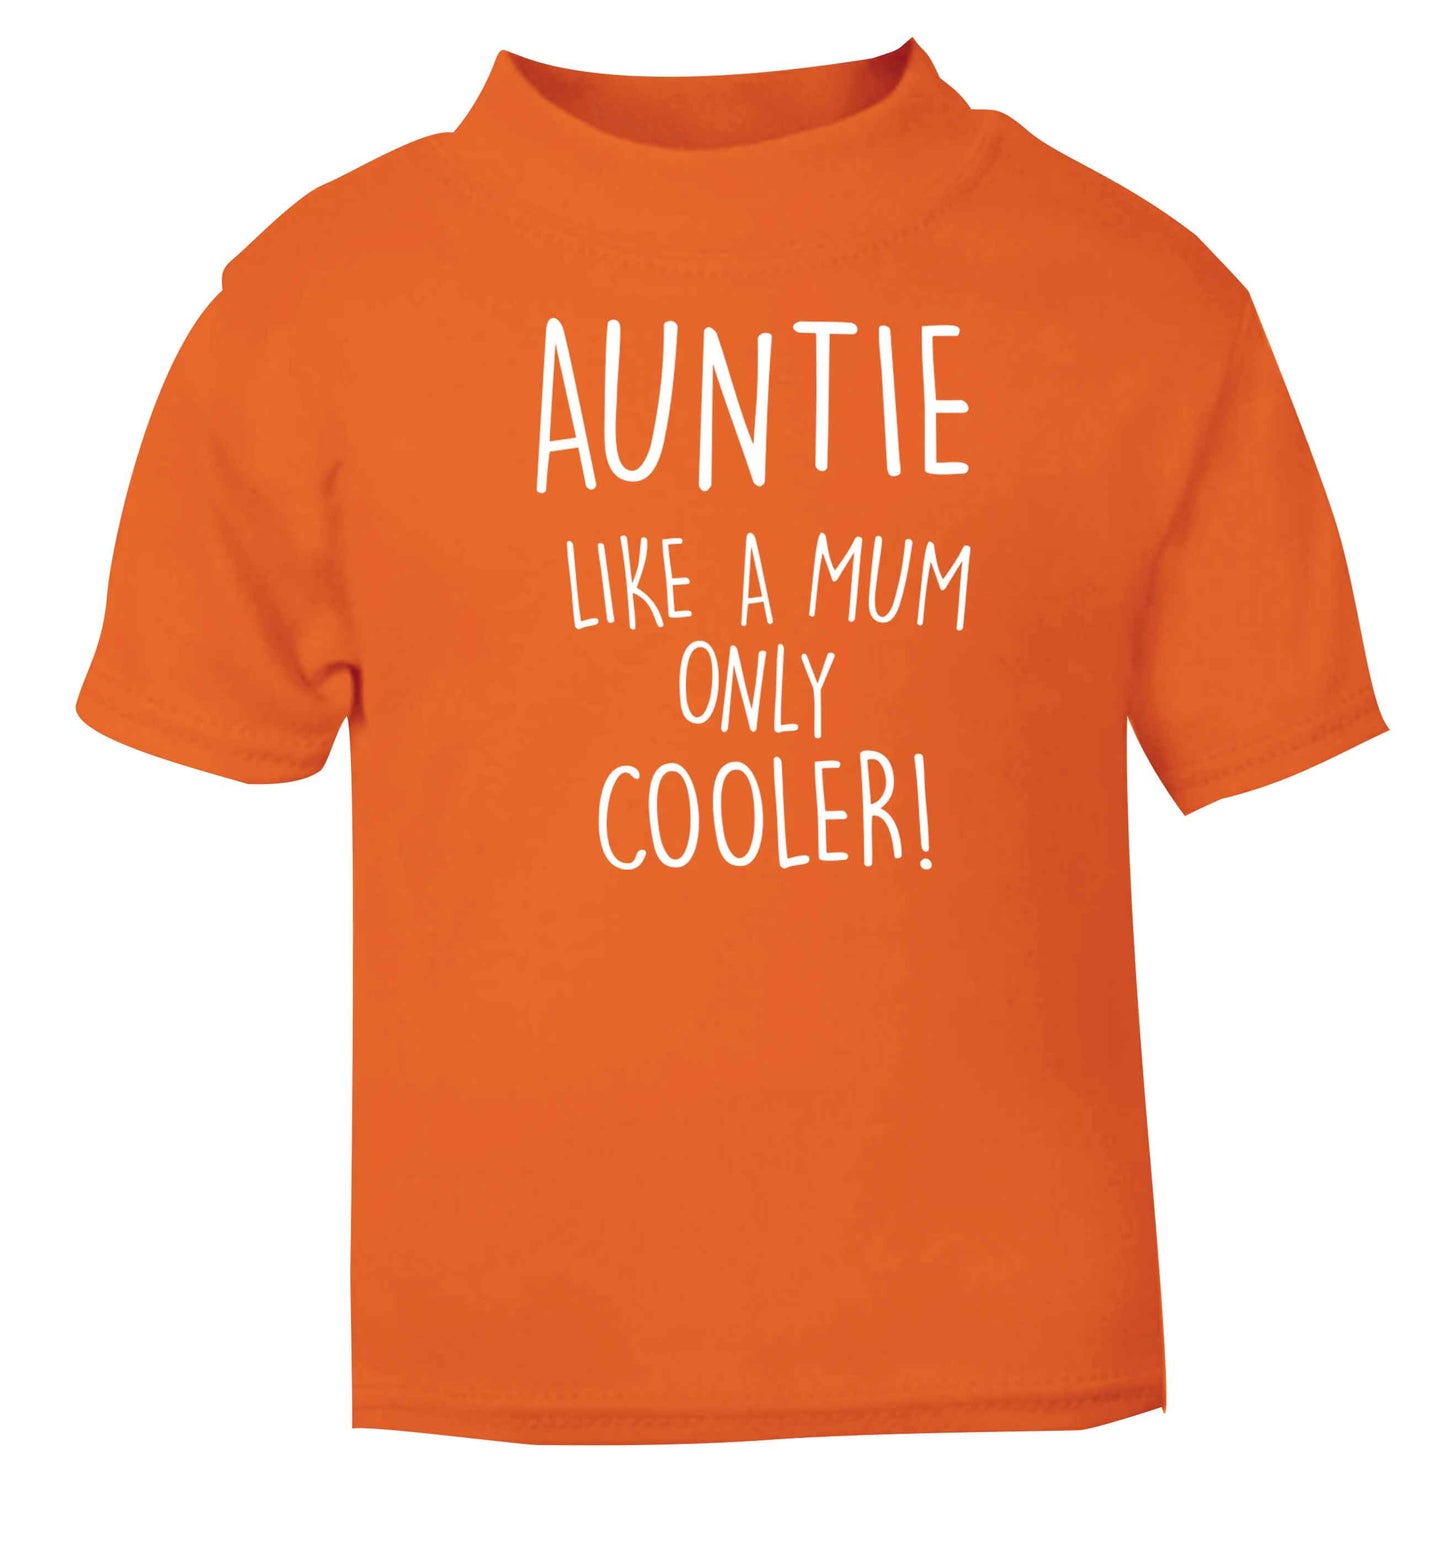 Auntie like a mum only cooler orange baby toddler Tshirt 2 Years